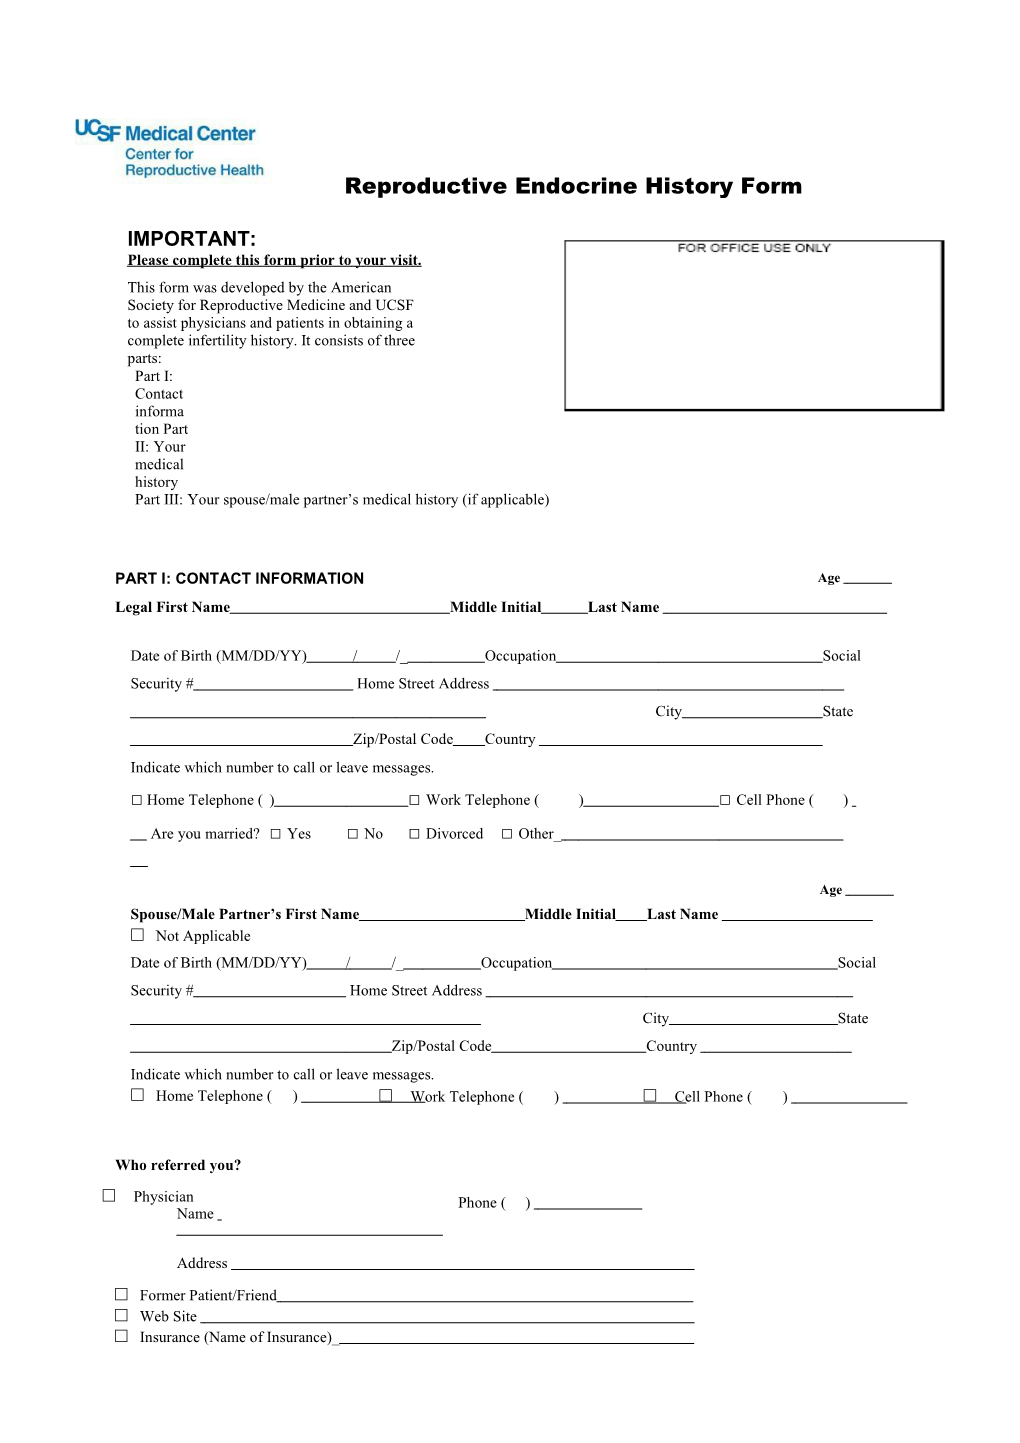 AMERICAN SOCIETY for REPRODUCTIVE MEDICINE Infertility History Form